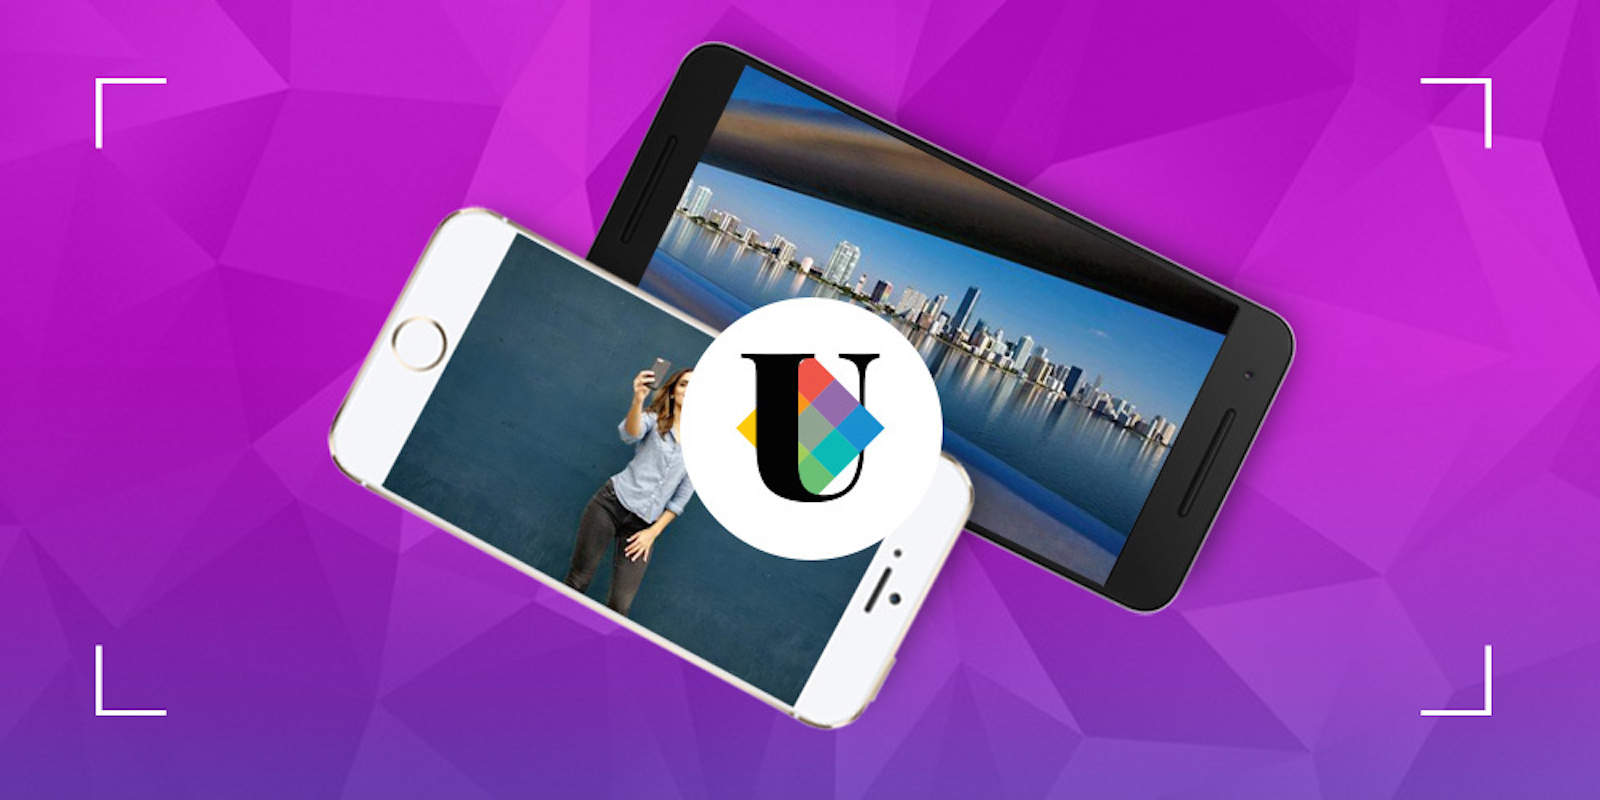 Master your smartphone camera with unlimited access to this massive educational library.